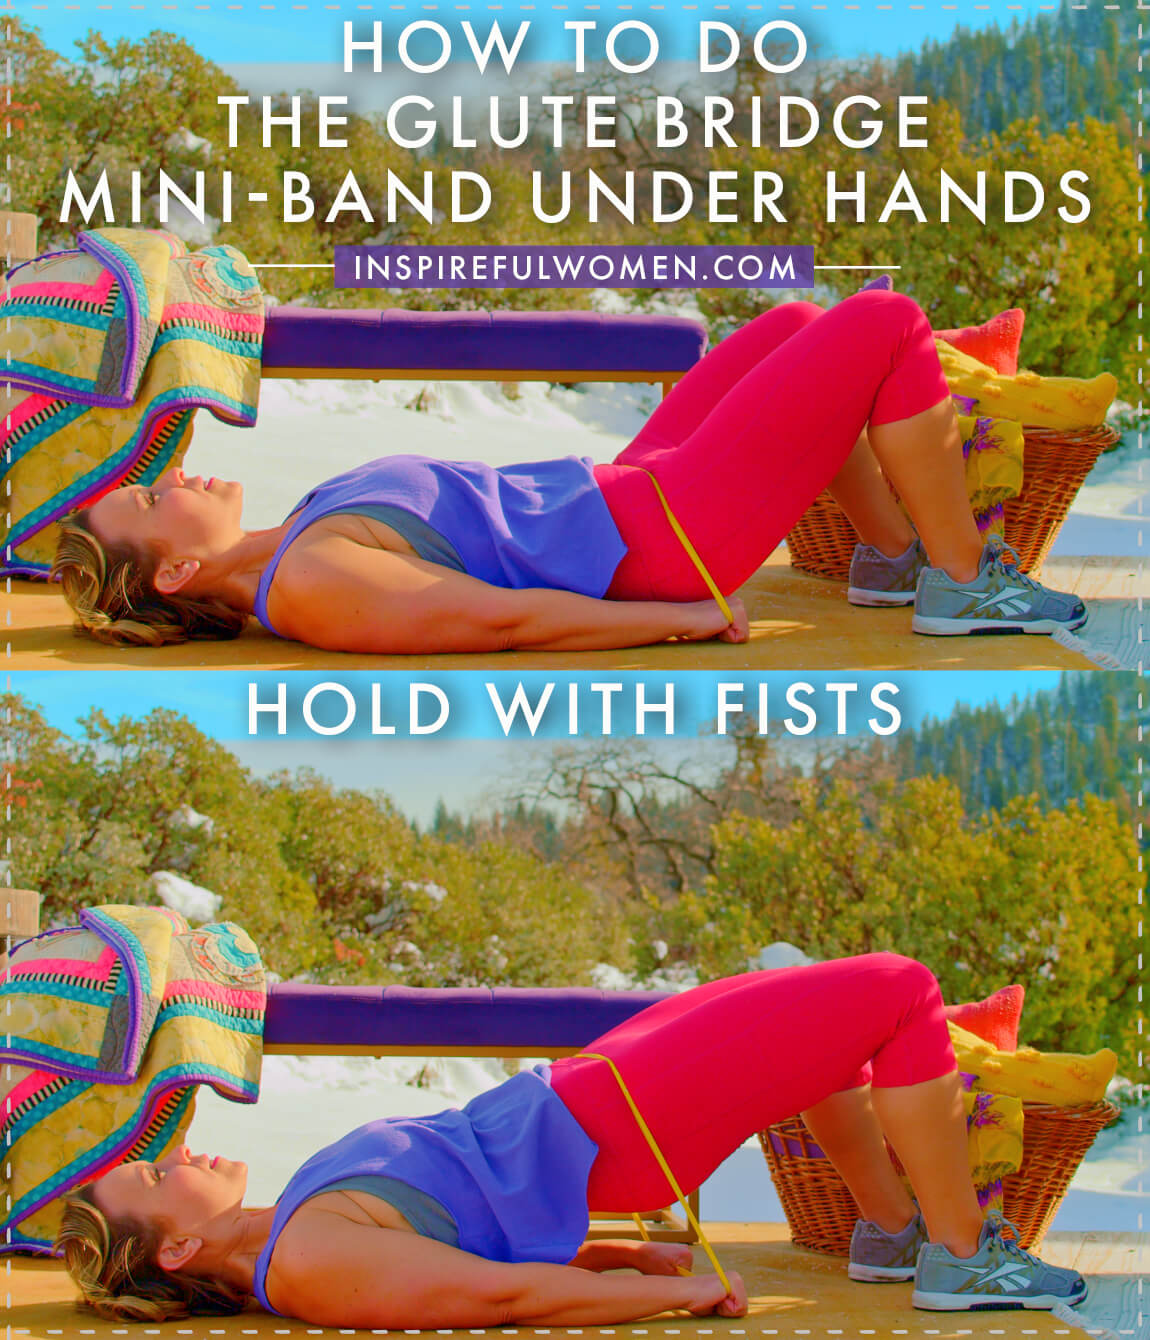 how-to-glute-bridge-lying-hold-with-fist-mini-band-under-hands-glute-isolation-exercise-at-home-proper-form